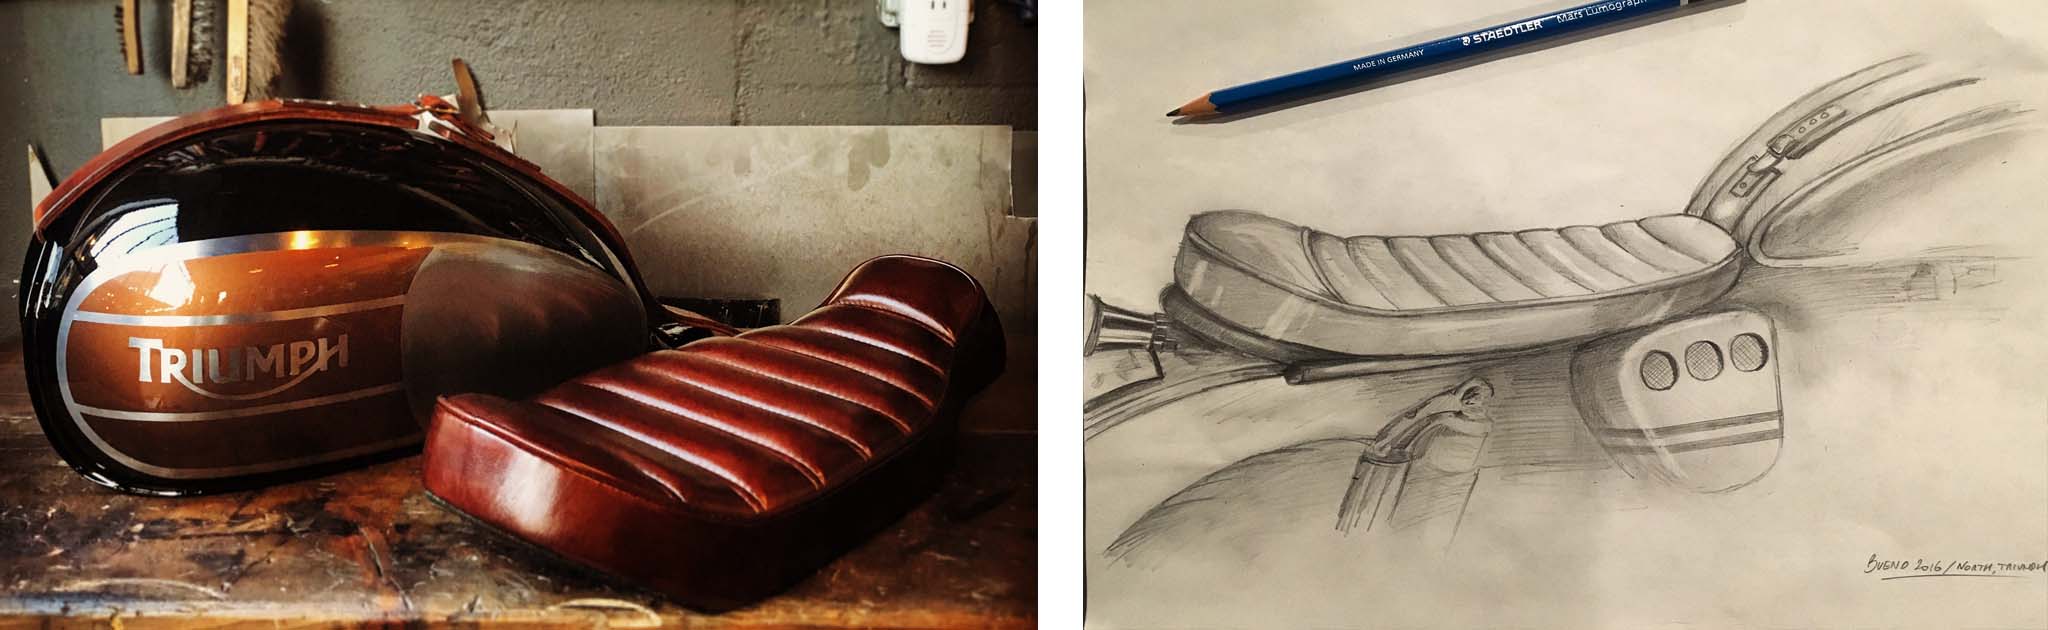 Motorcycle Leather Saddle and sketched design